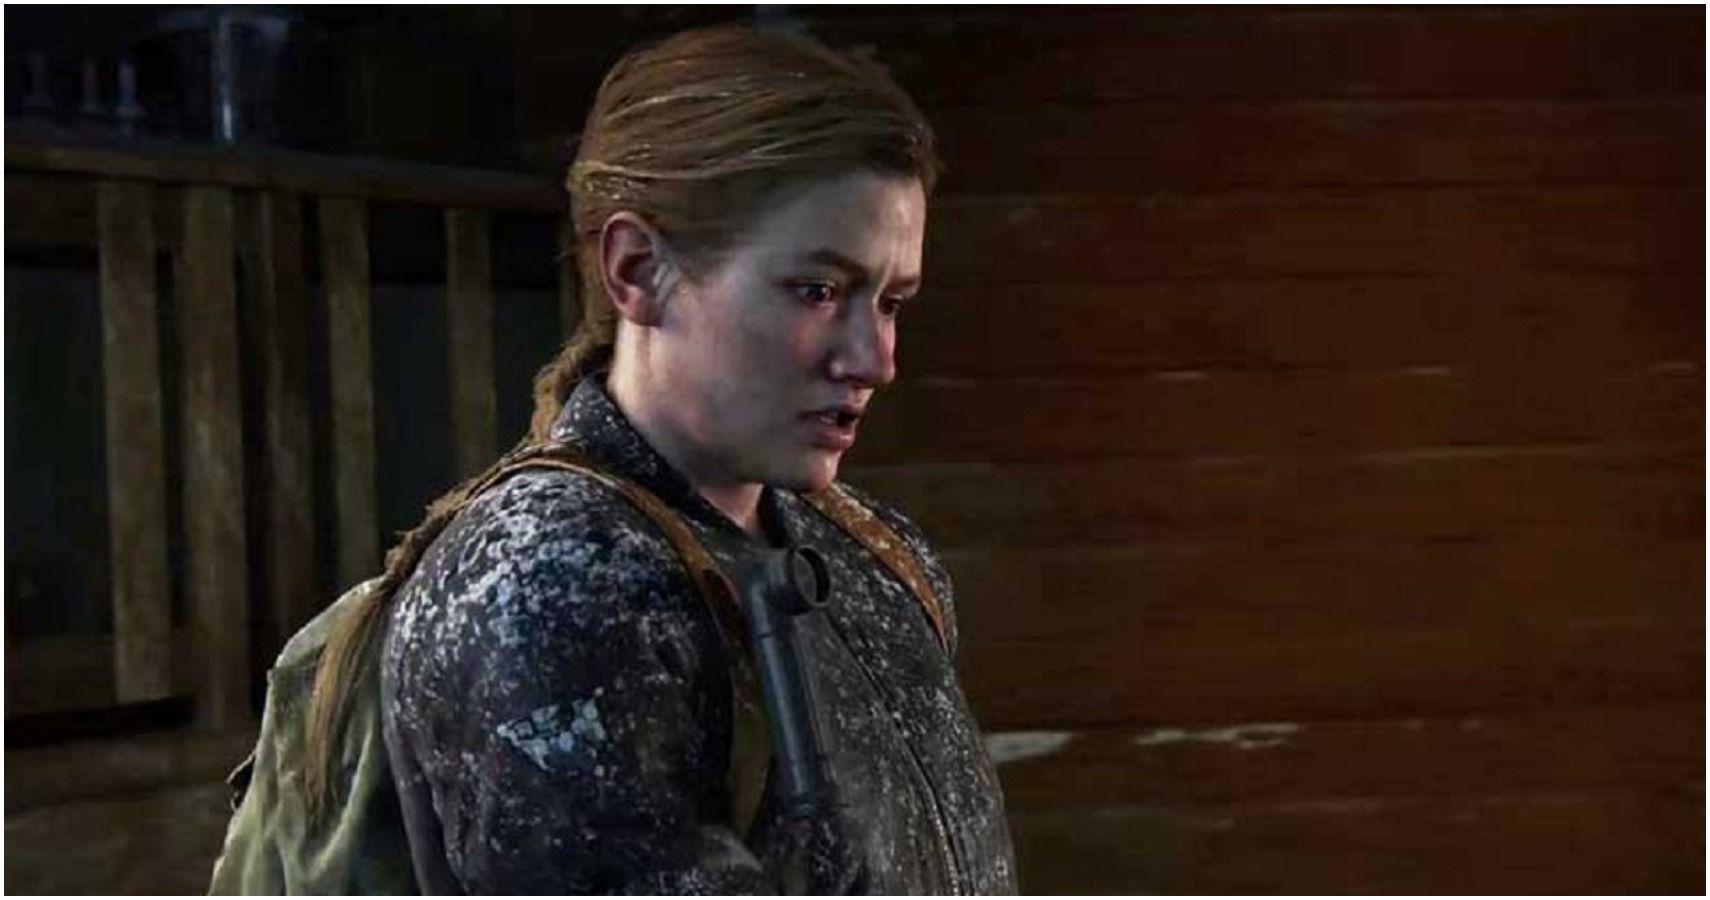 Abby Shoots Tommy in the face - Last of us 2 